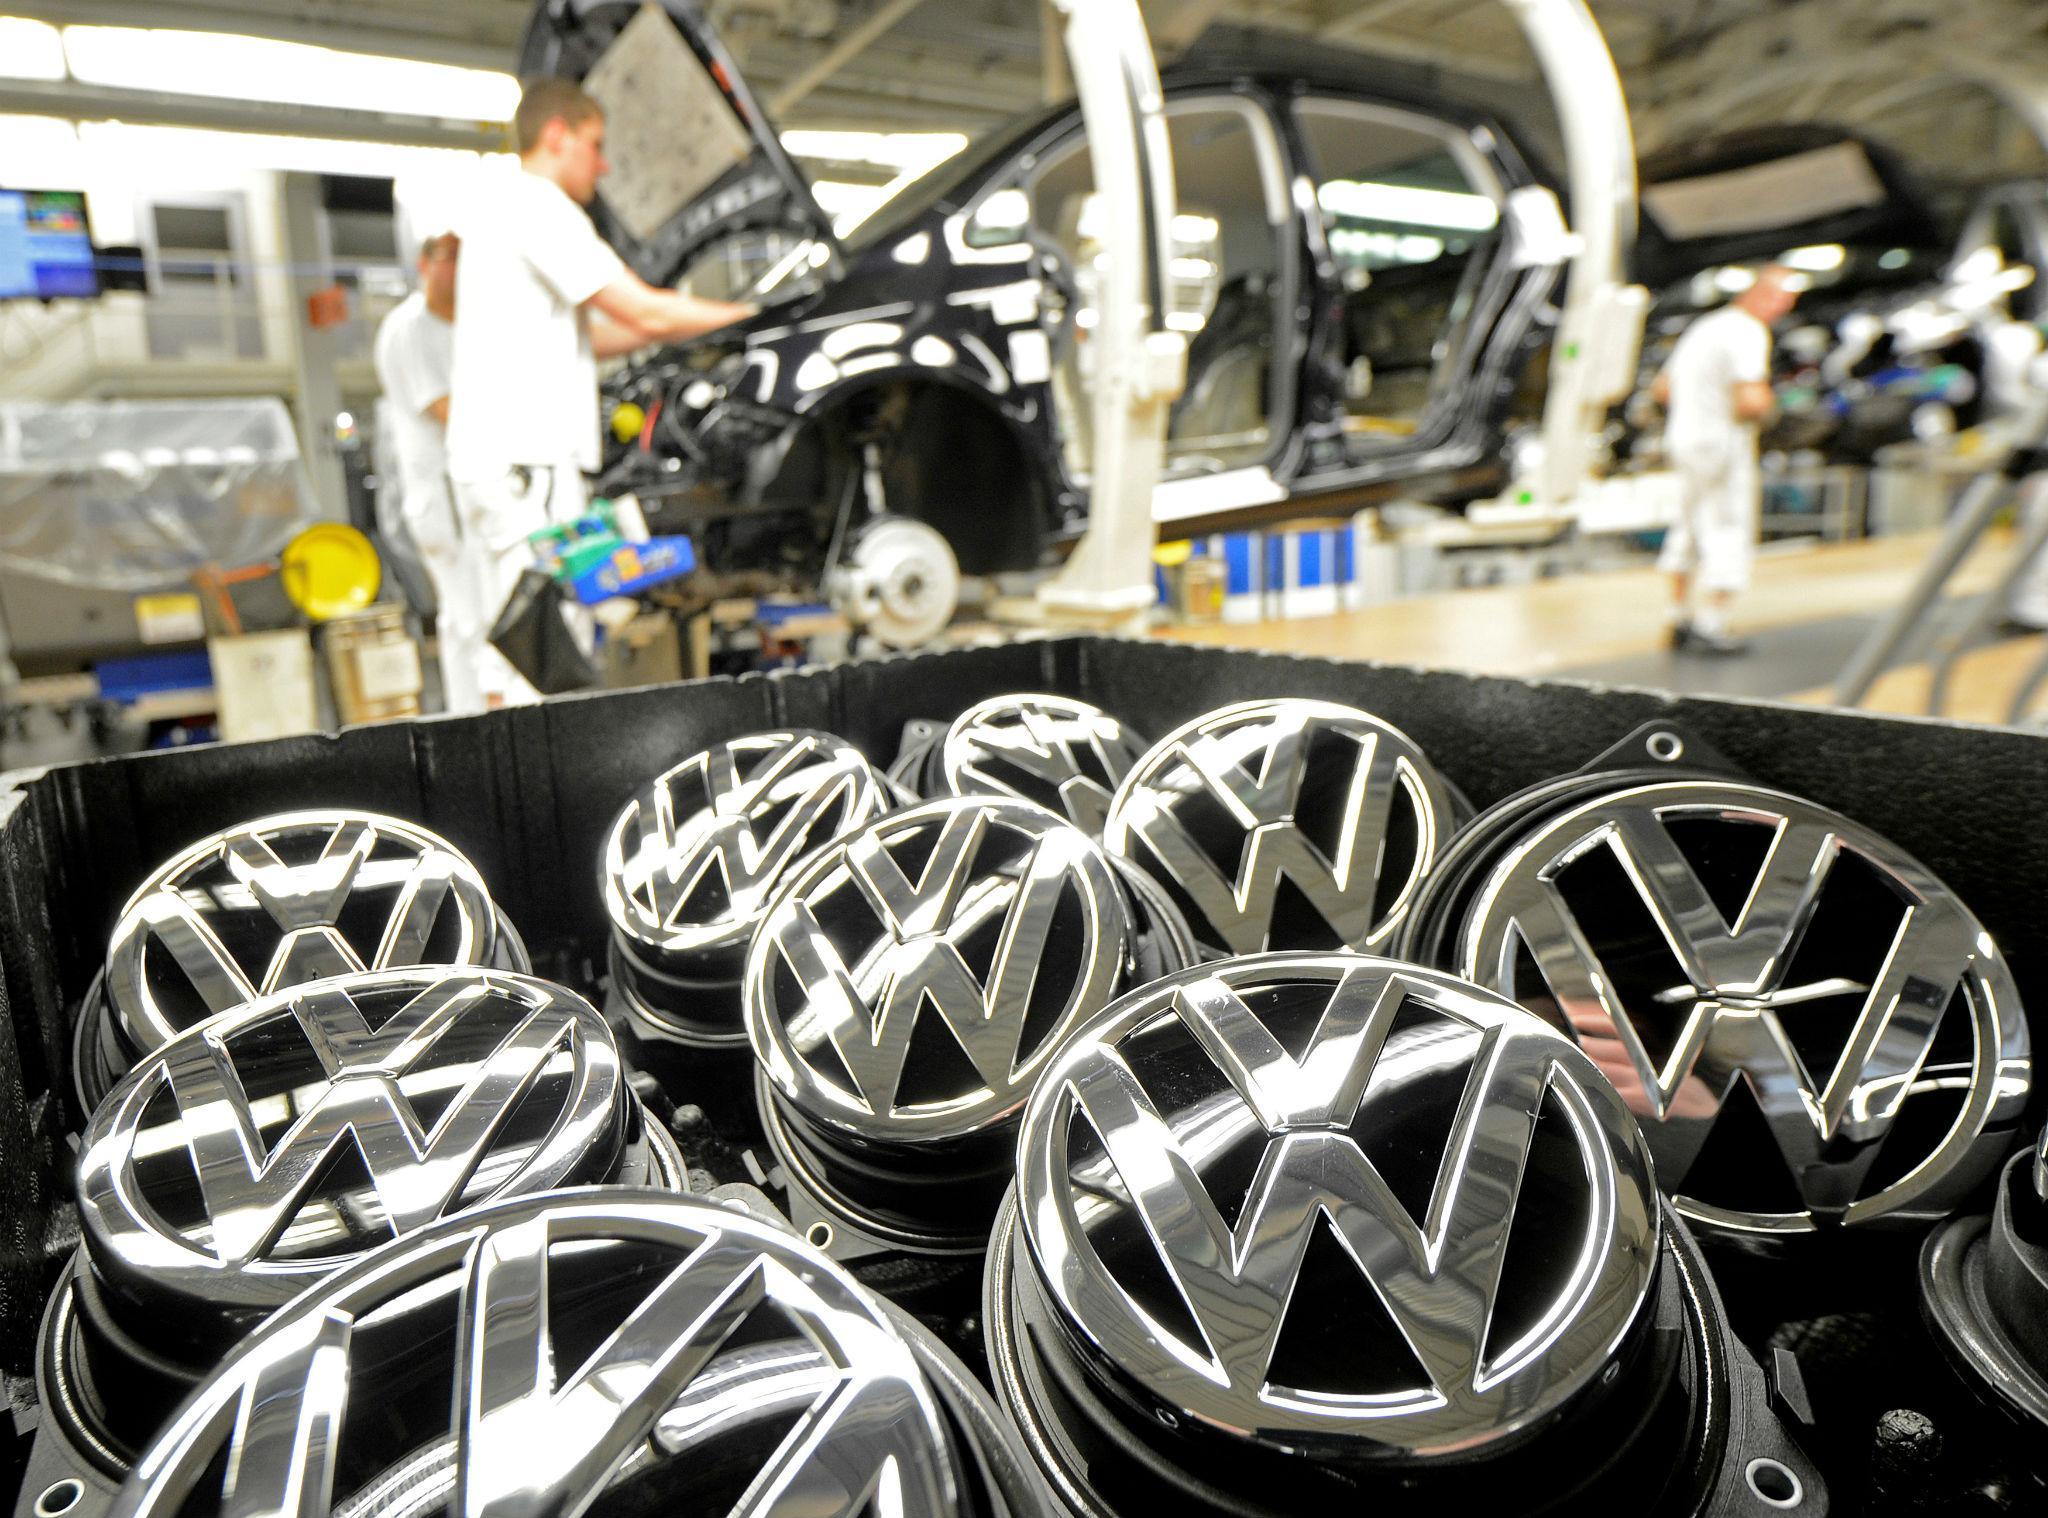 Several other manufacturers have more polluting cars than Volkswagen, which has come under fire for cheating emissions tests